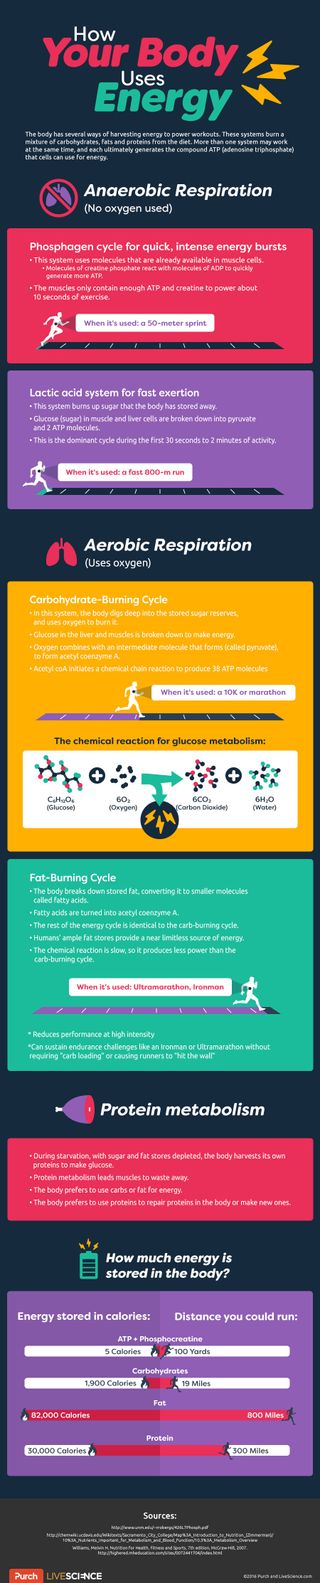 how much energy the body uses during exercise.